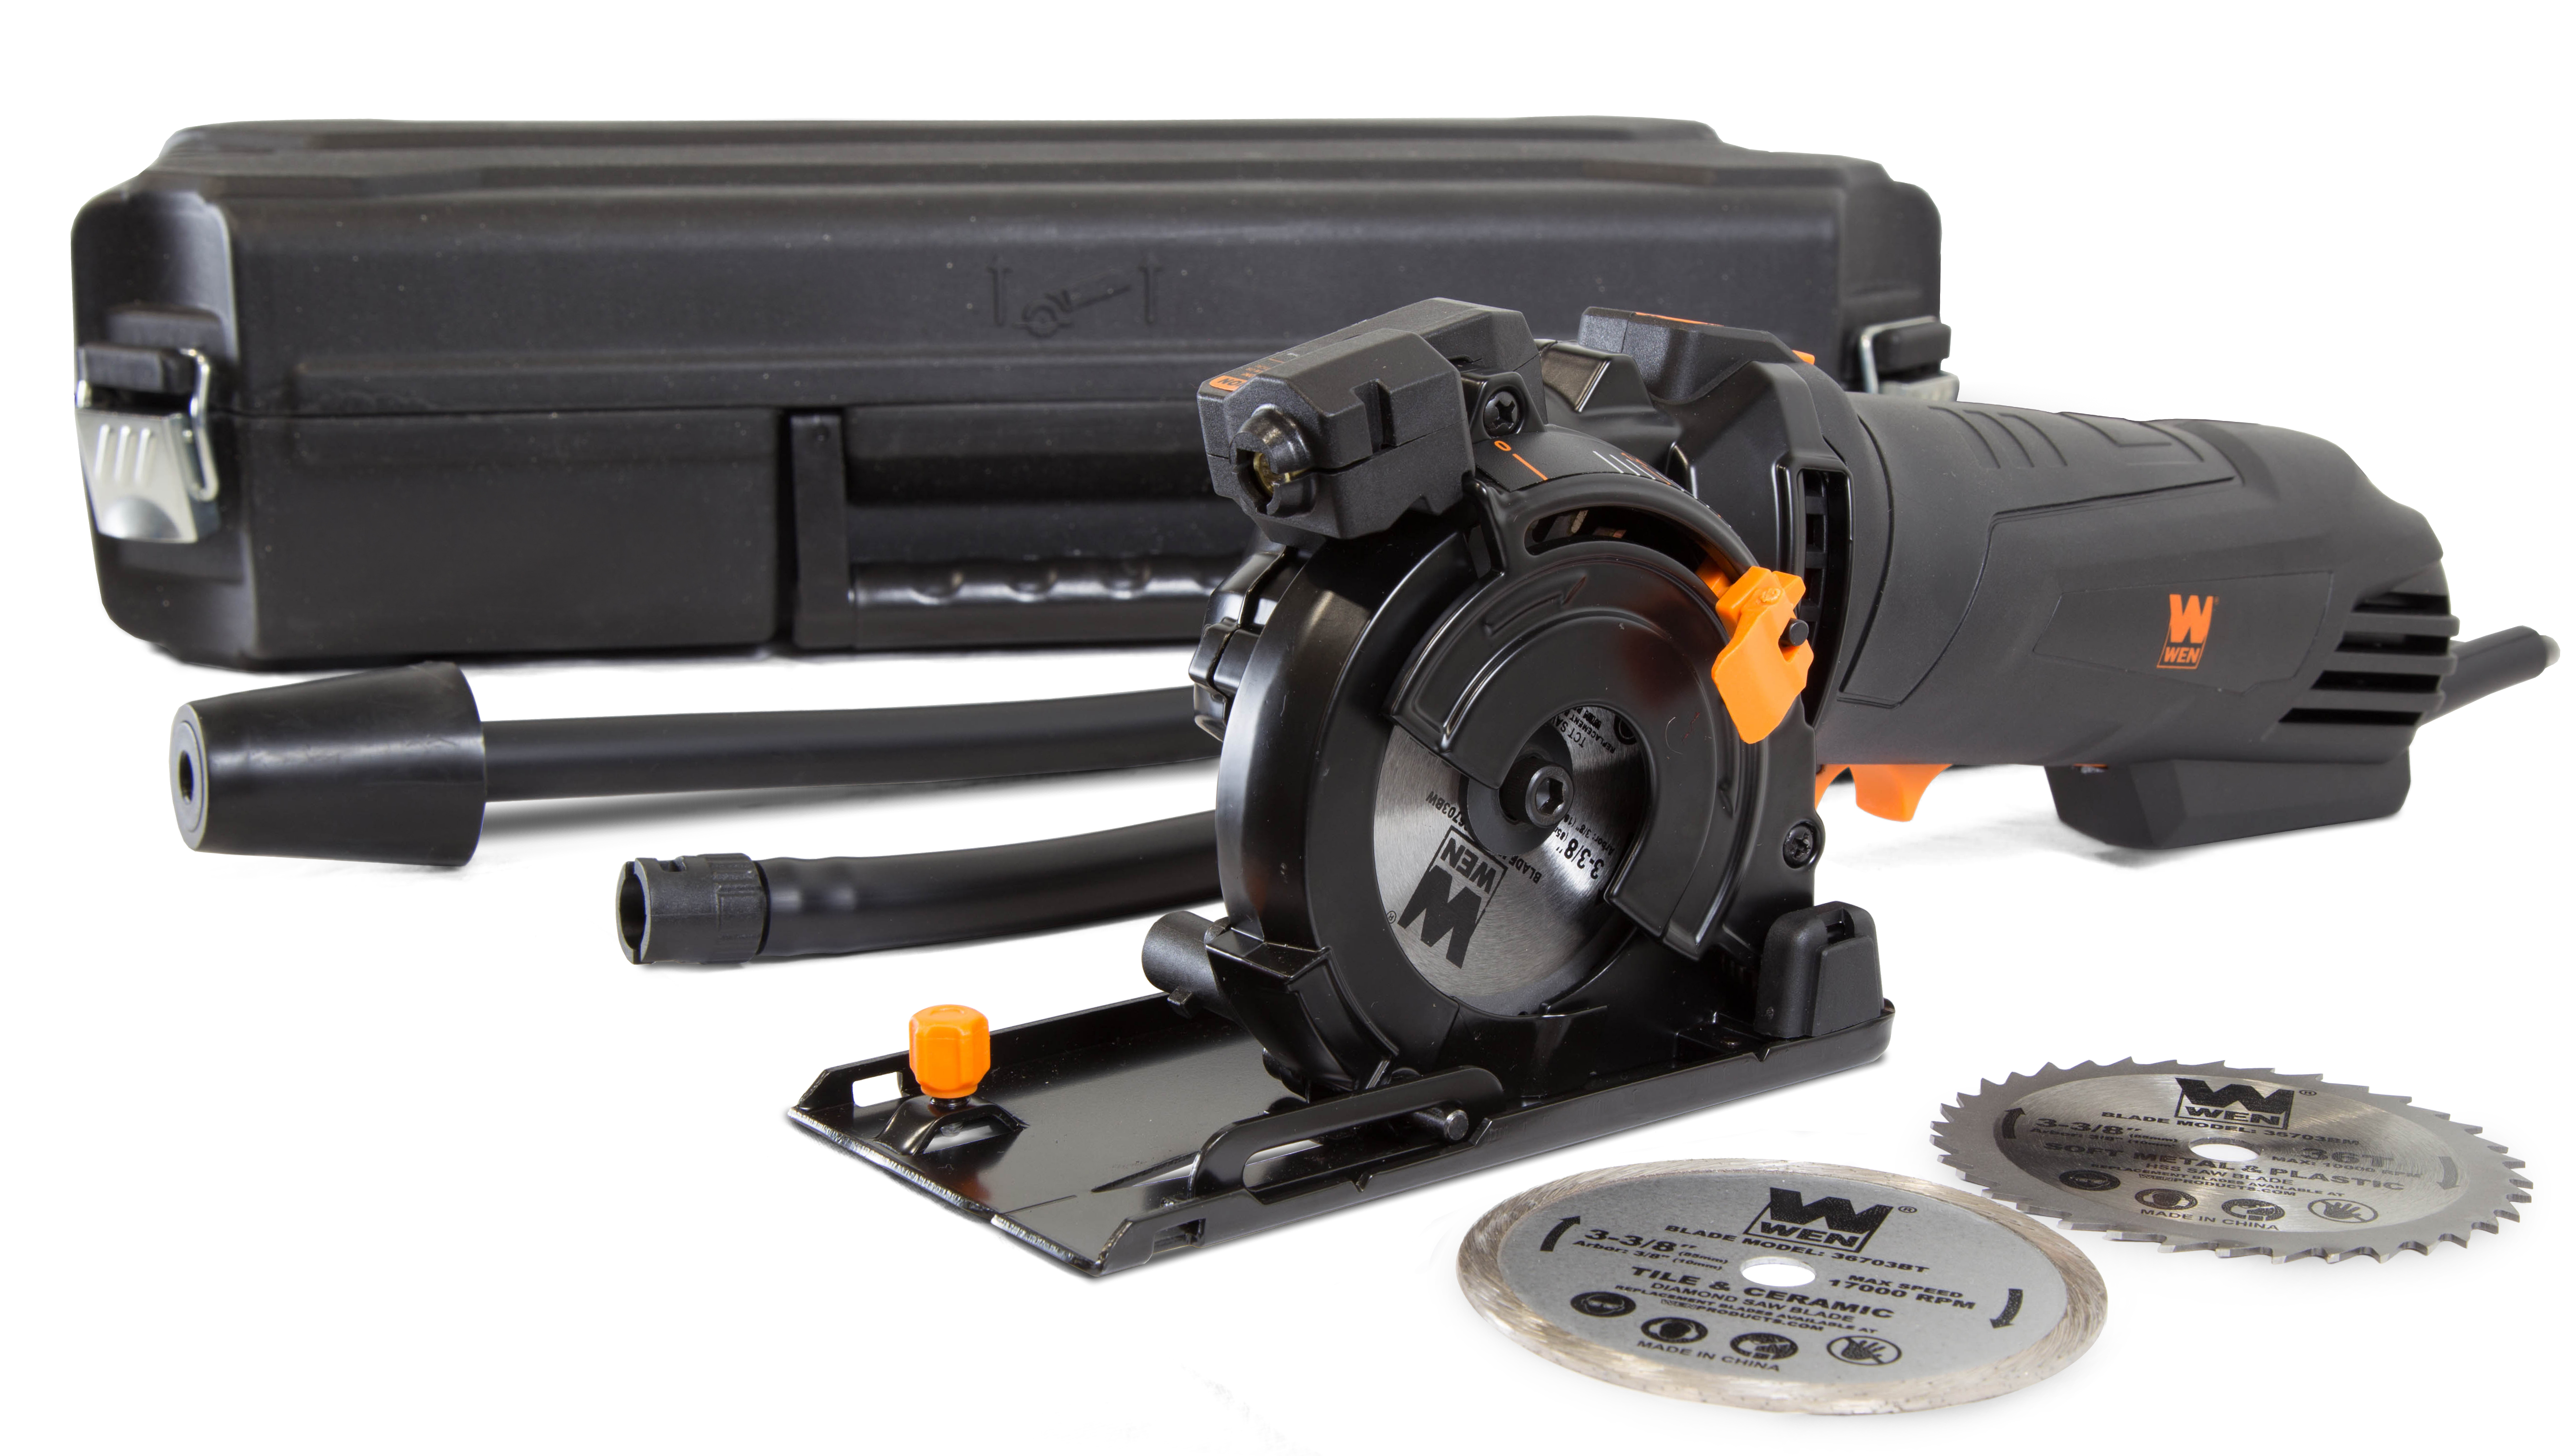 WEN 36703 4.2-Amp 3-3/8-Inch Compact Circular Saw with Laser, Carrying Case, and Three Blades - image 3 of 7